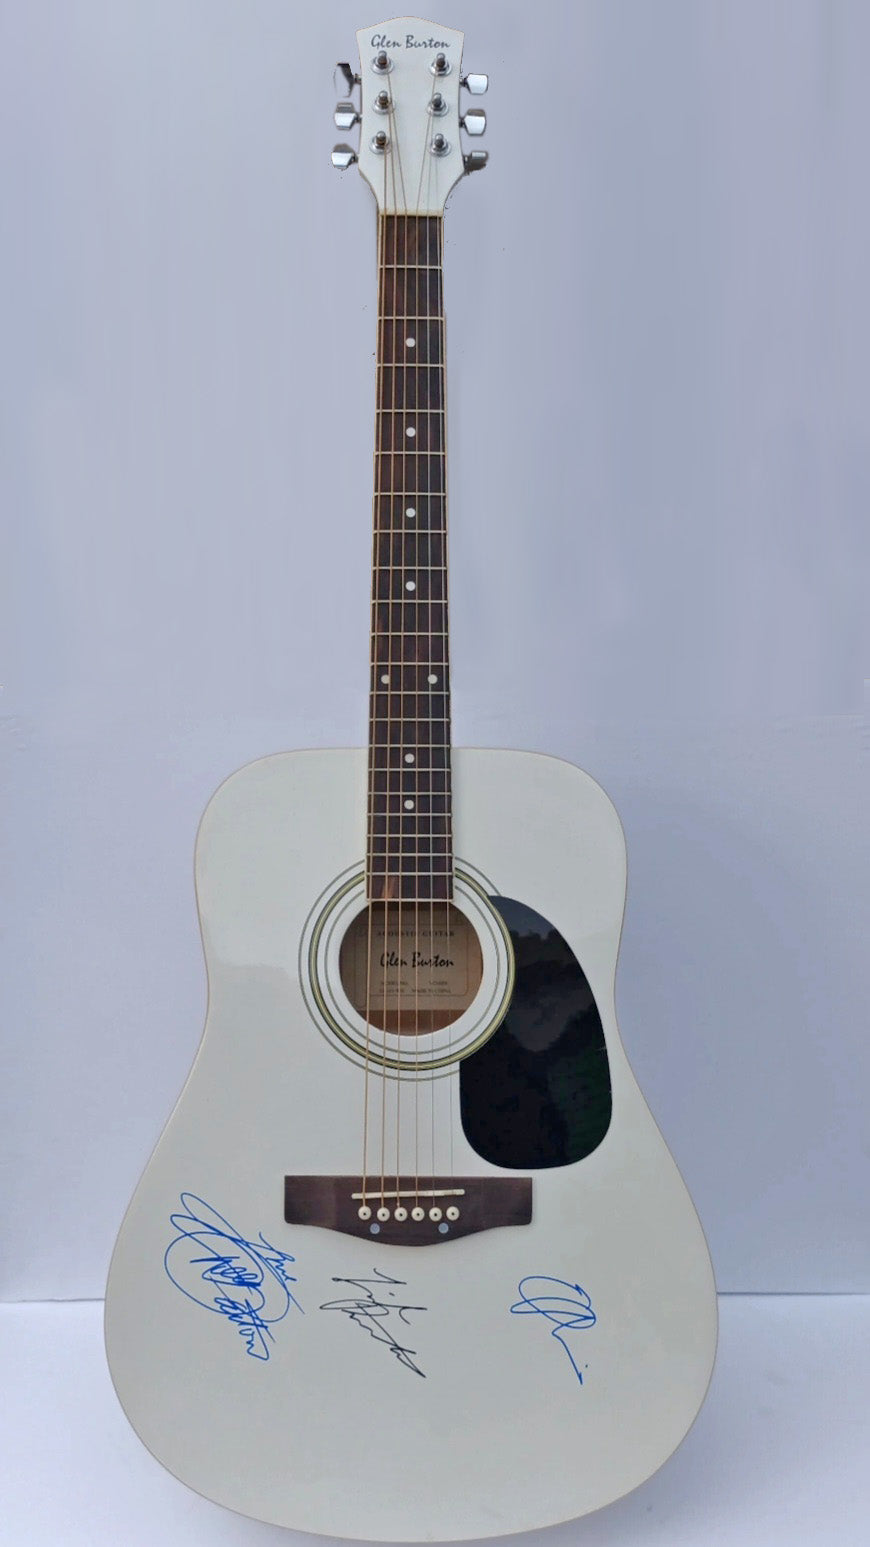 Dolly Parton, Linda Rondstadt and Emmy Lou Harris Full size 39'' Huntington acoustic guitar signed